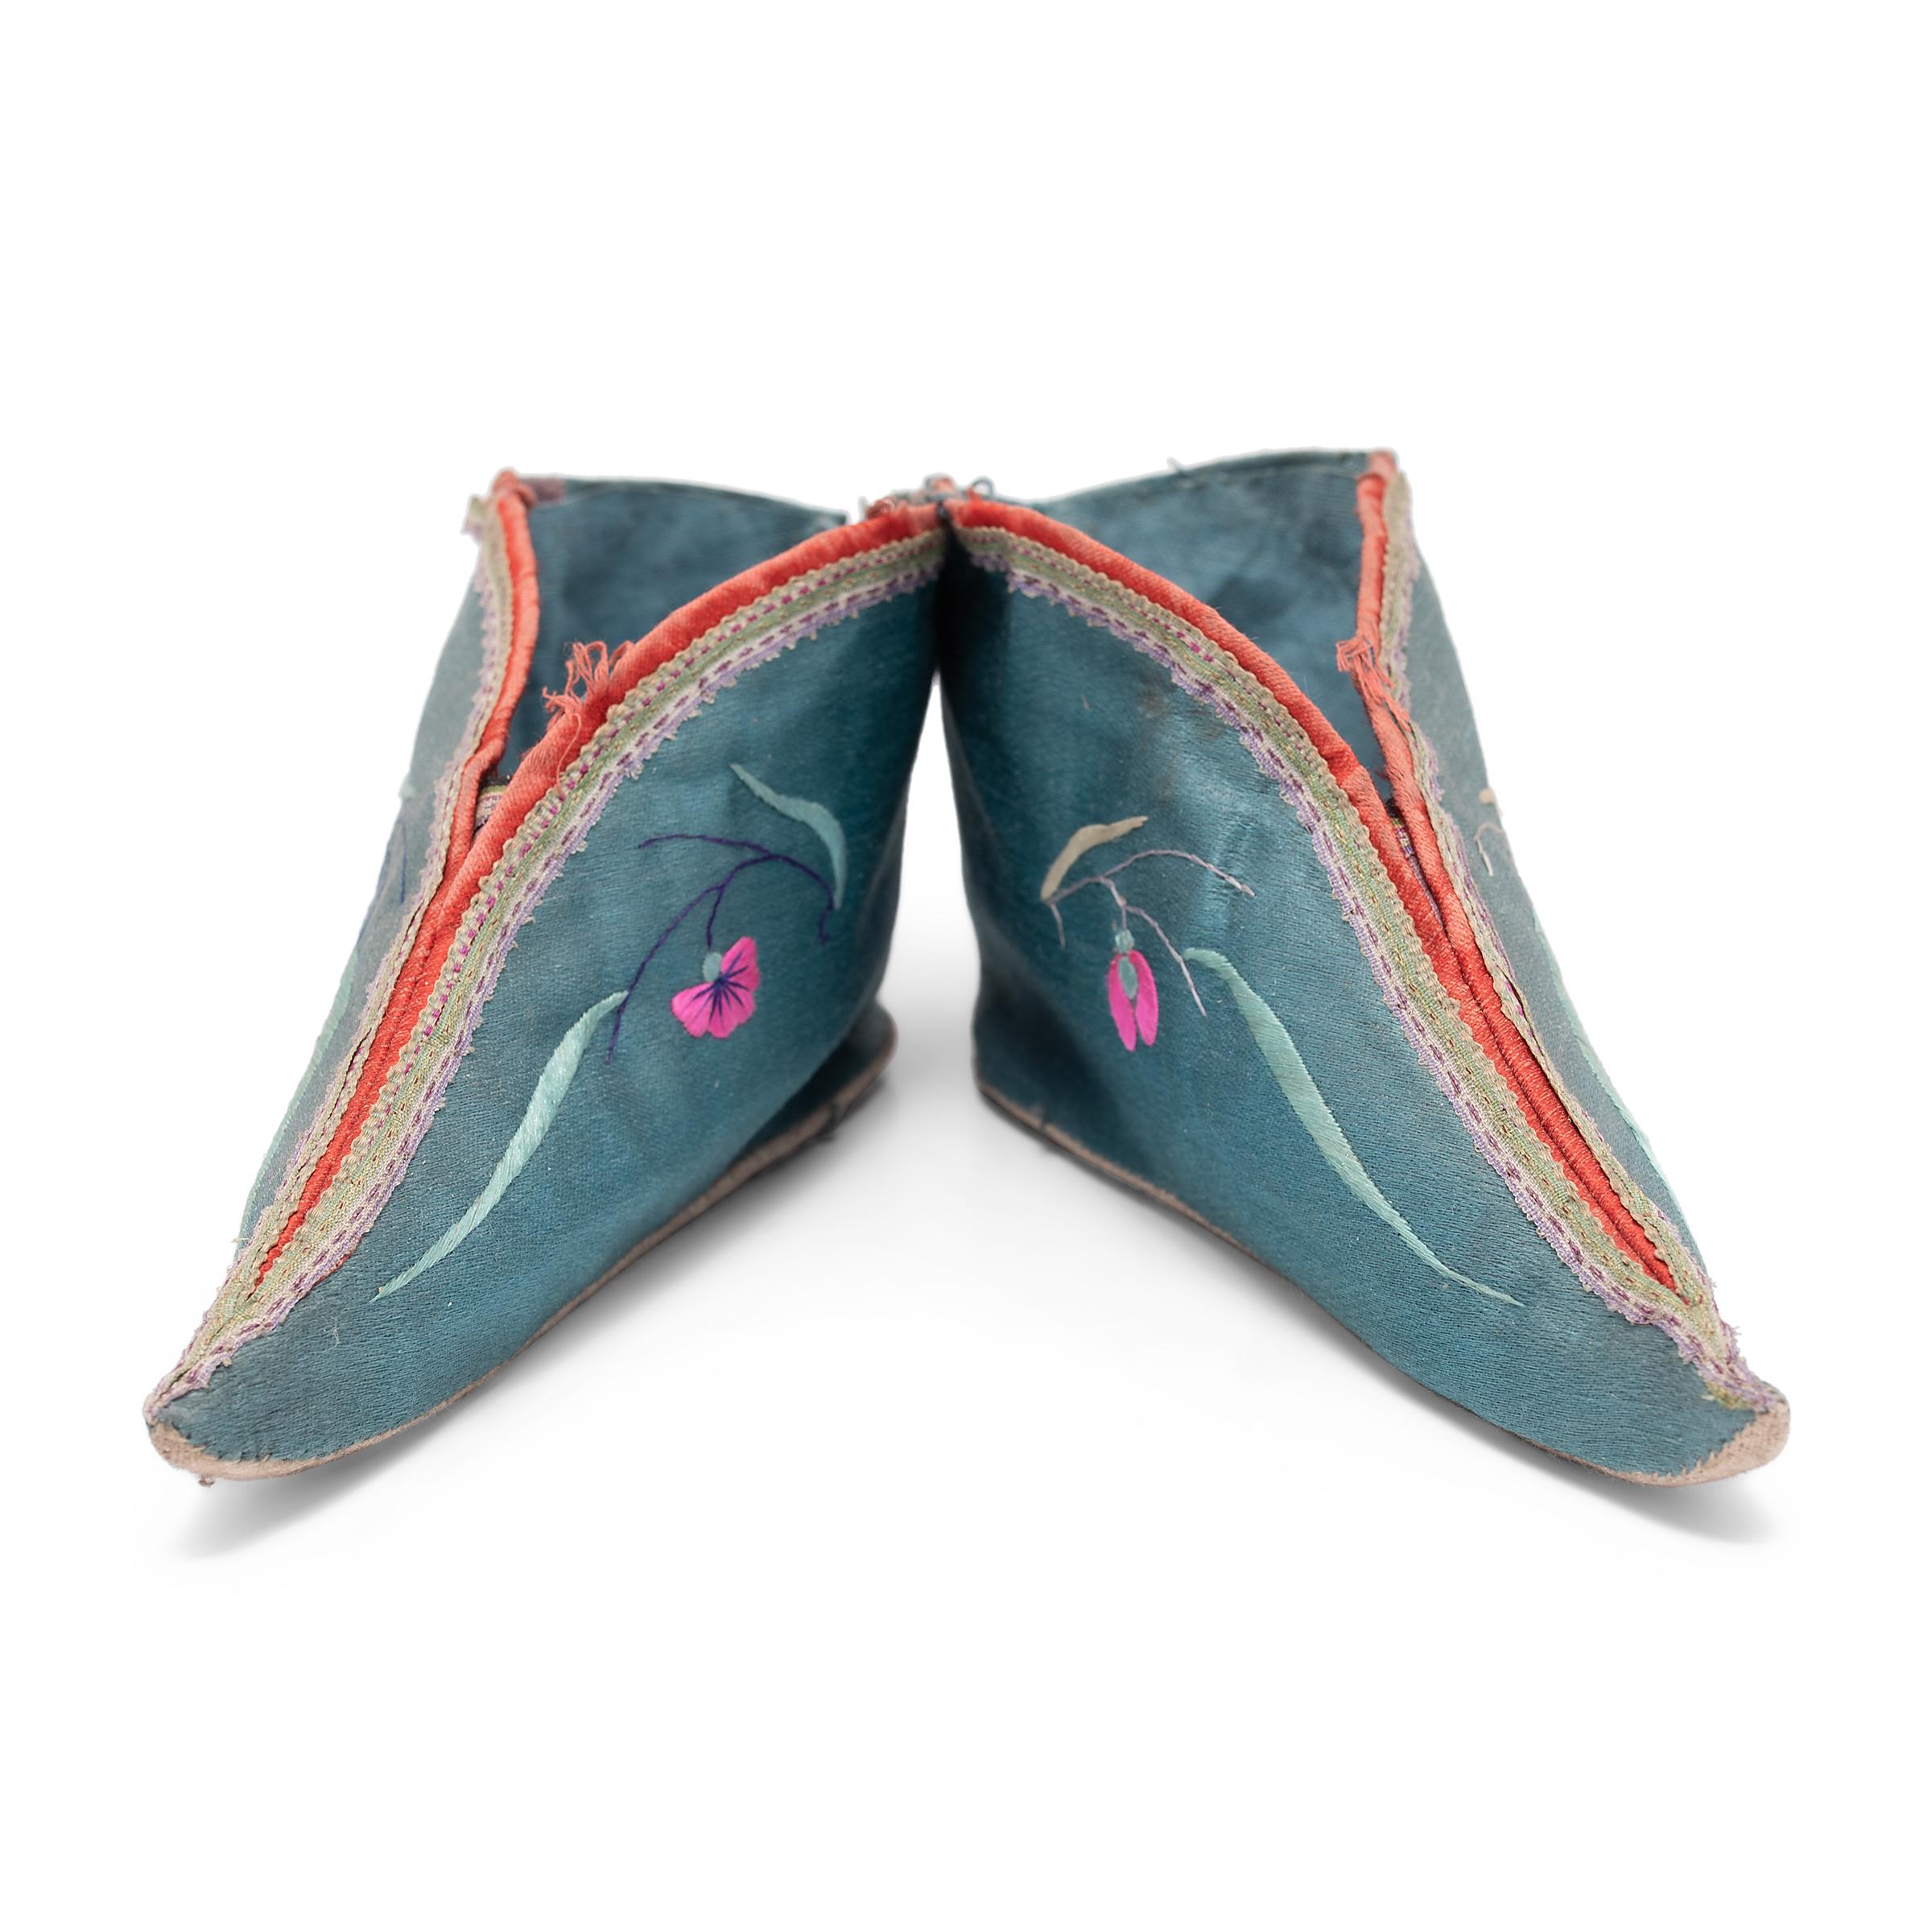 These dainty, pointed slippers, made of blue silk and embroidered with pink flowers, were shaped to resemble a lotus bud and enhanced the diminutive shape of bound feet. A practice that began in the Tang dynasty and reached the height of its